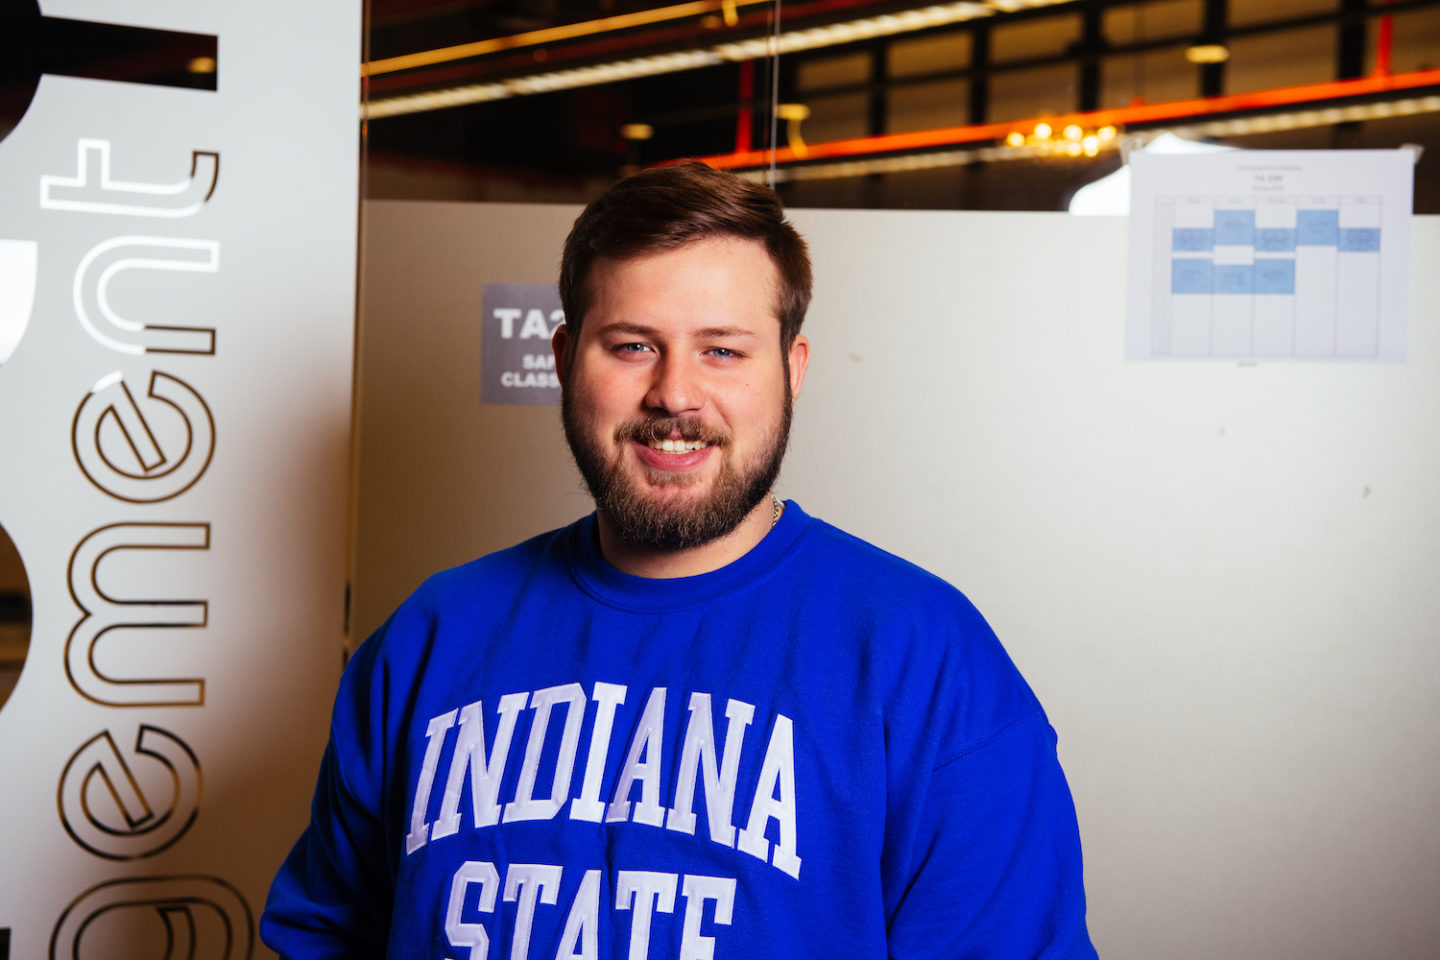 Monroe always dreamed of graduating from Indiana State. After earning an associate degree in process technology from Lincoln Trail College, he turned his attention to researching safety management degree programs, and, to his delight, the program at Indiana State was a perfect fit.